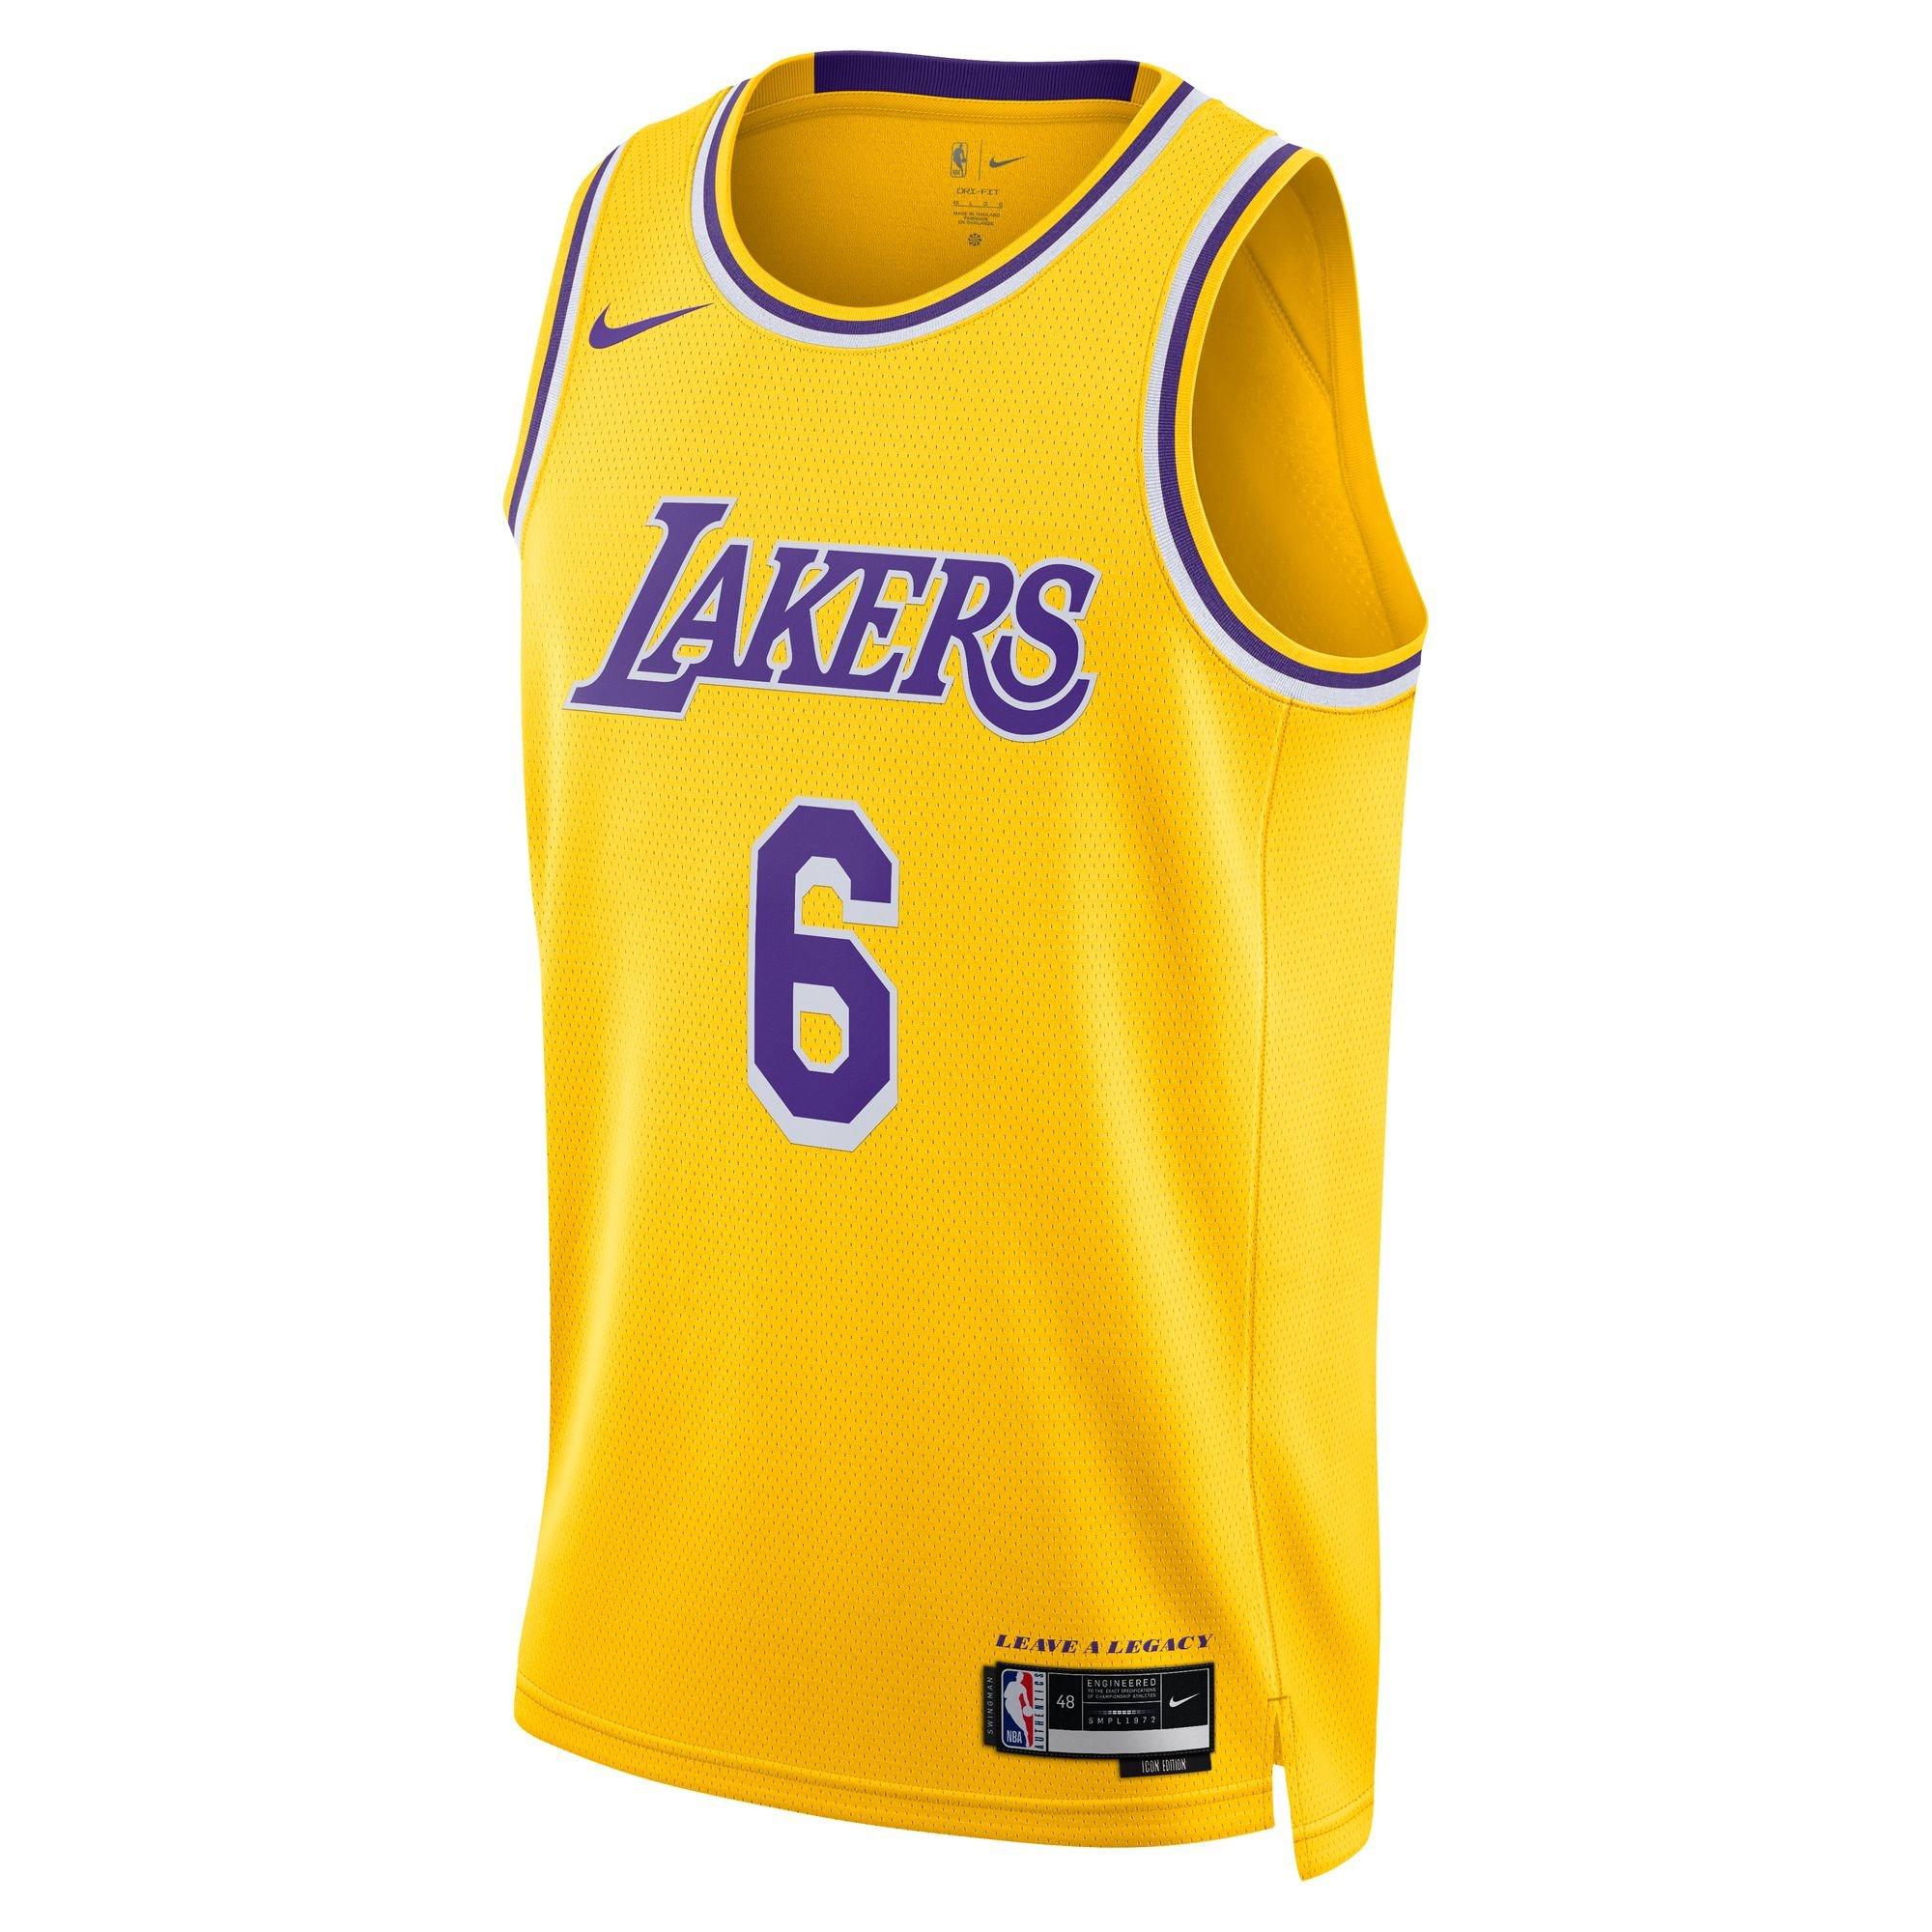 lebron james number 6 jersey lakers